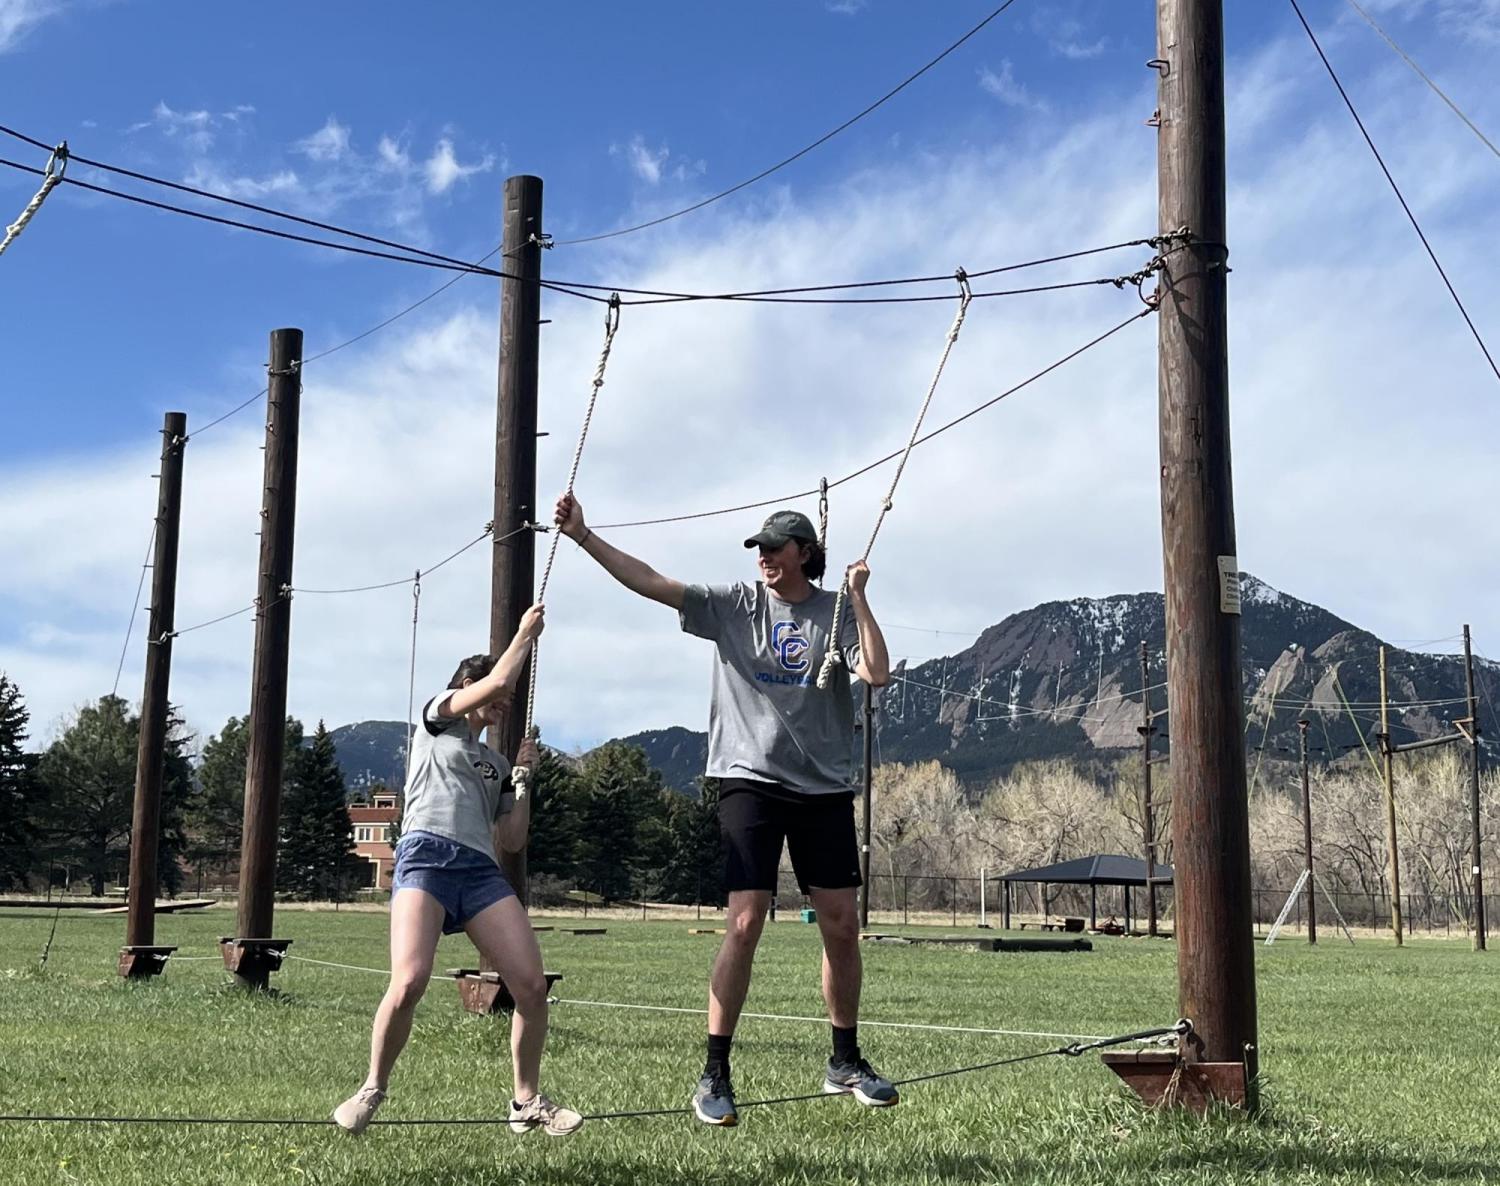 ELI students on the ropes course at CU Boulder